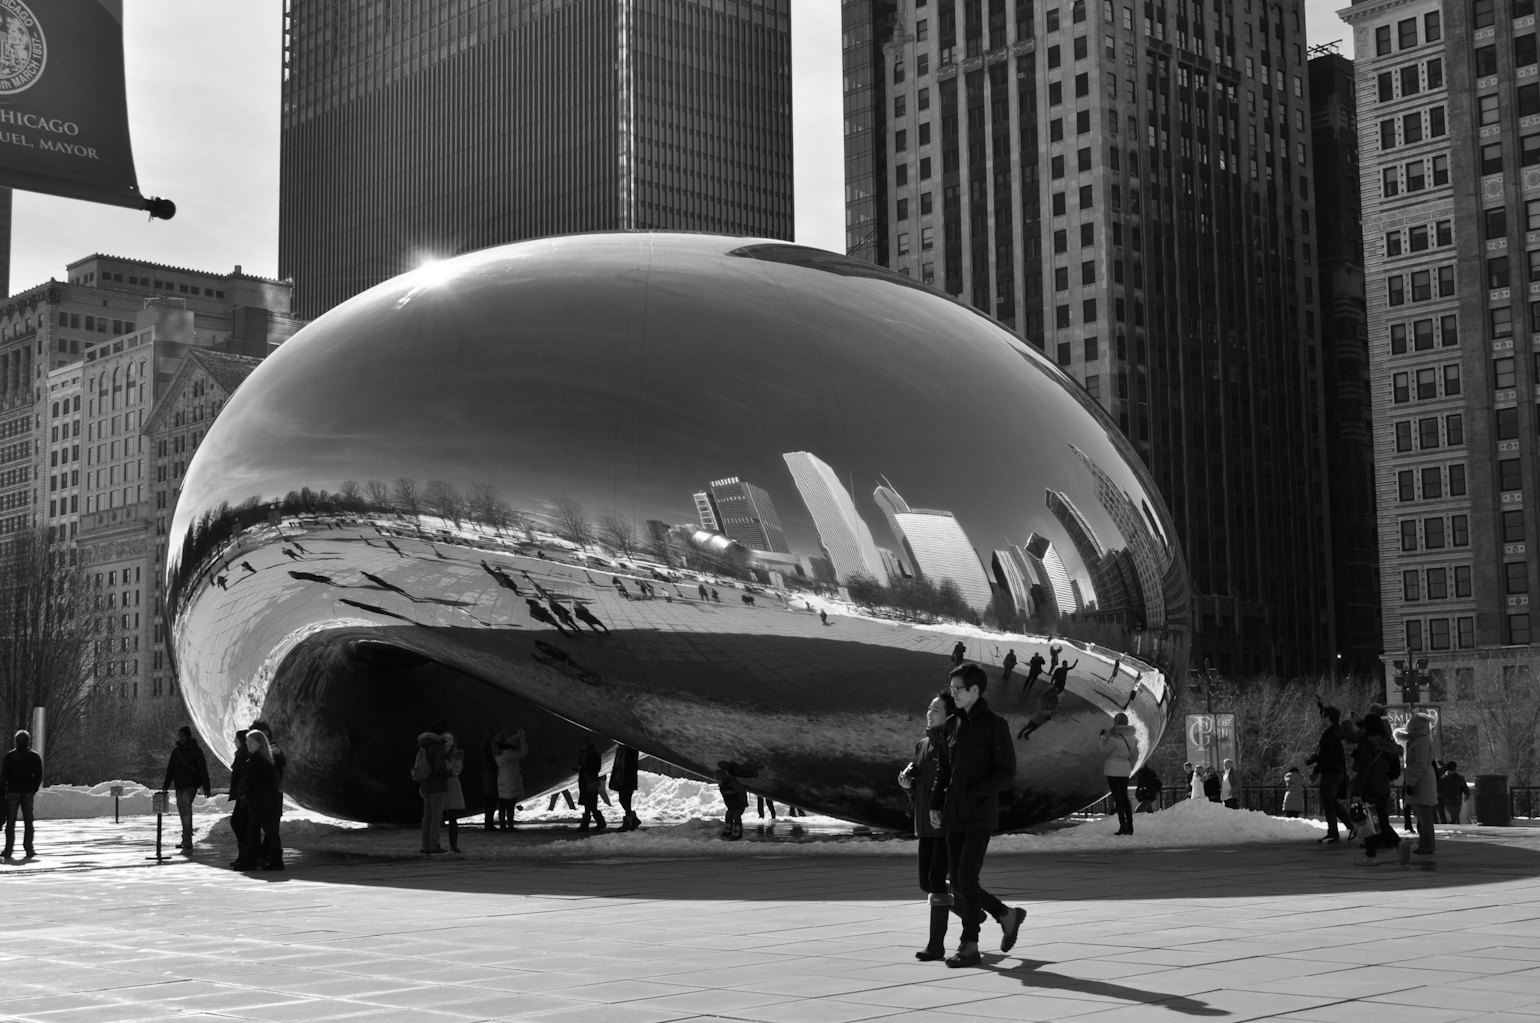 Black and white image of a sculture in Chicago, Illinois.